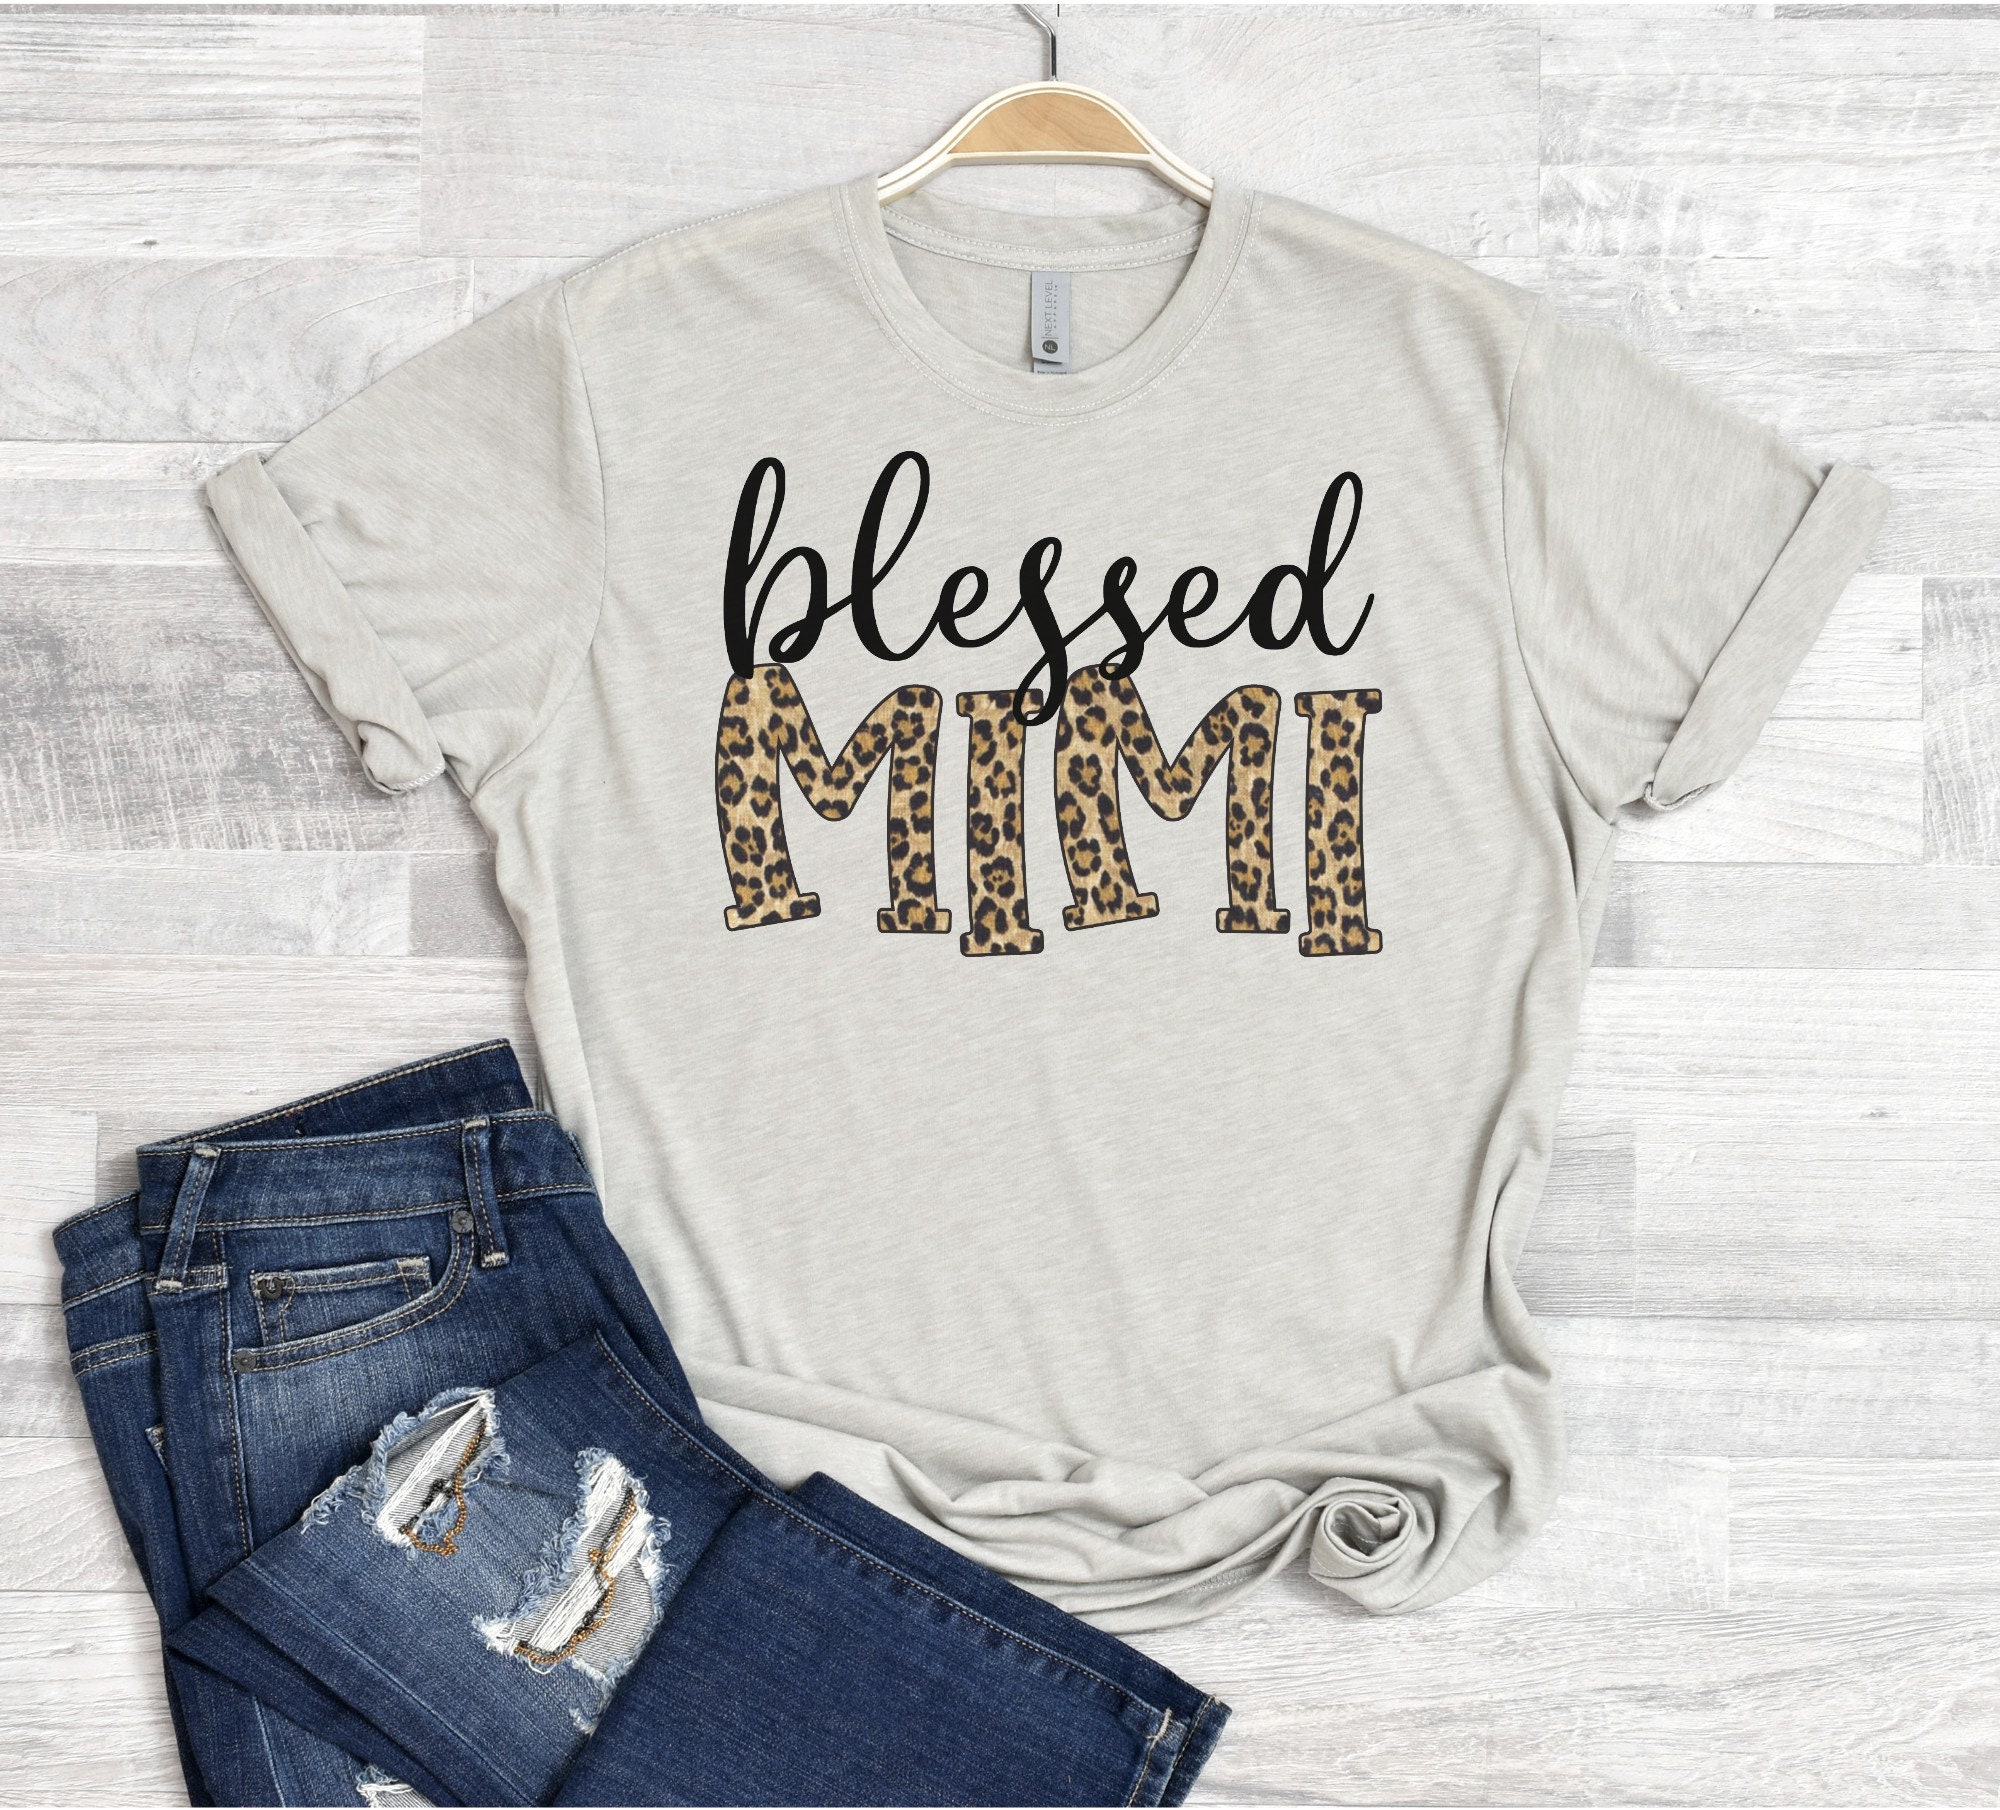 Blessed Mimi Tee - Graphic Polyester Blend T Shirt Comfy Adult Sizes Xs S M L Xl 2Xl